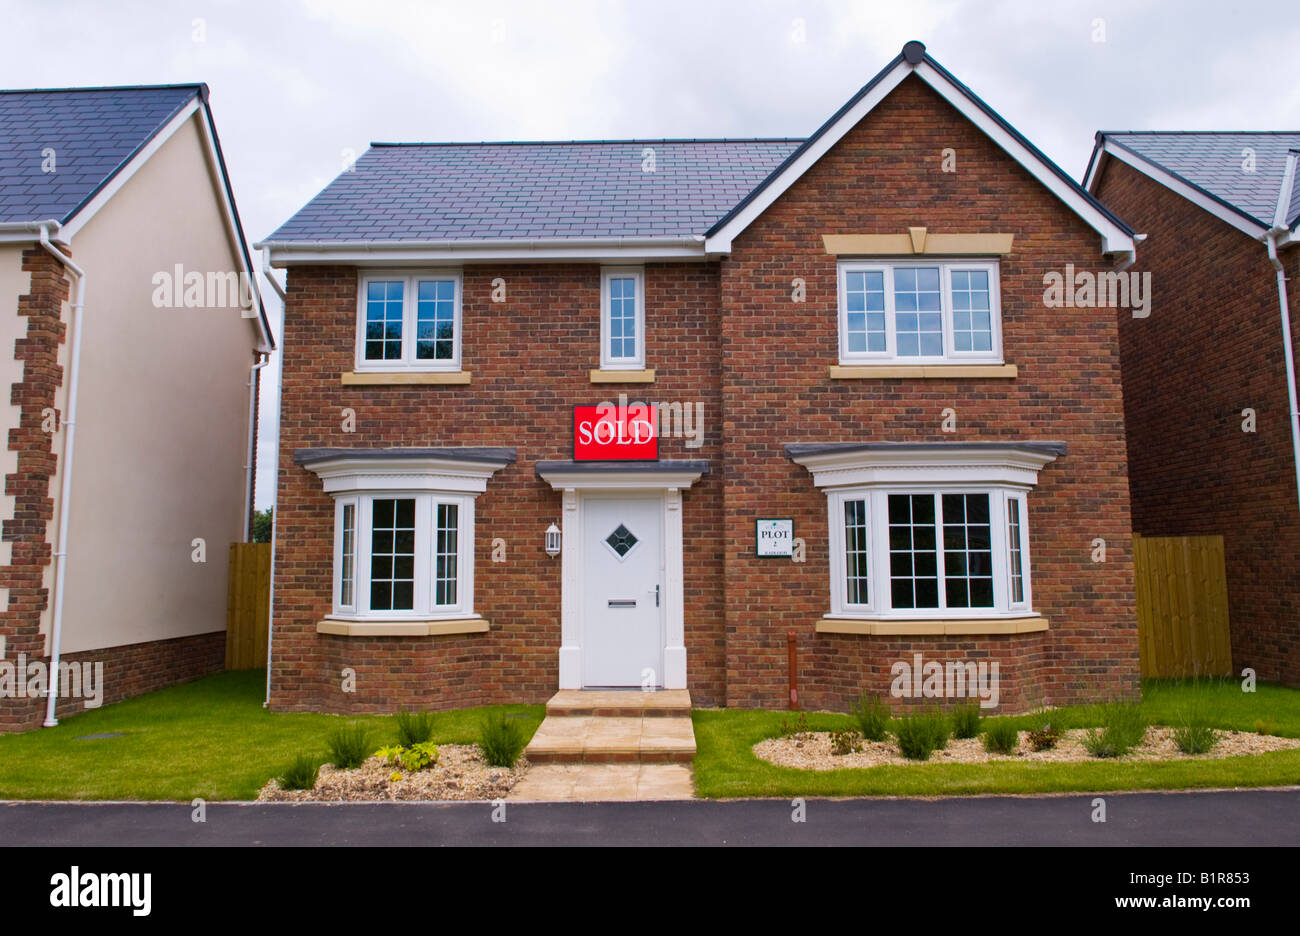 Newly built house marked as SOLD on Barratt estate at Llanfoist near Abergavenny Monmouthshire South Wales UK EU Stock Photo